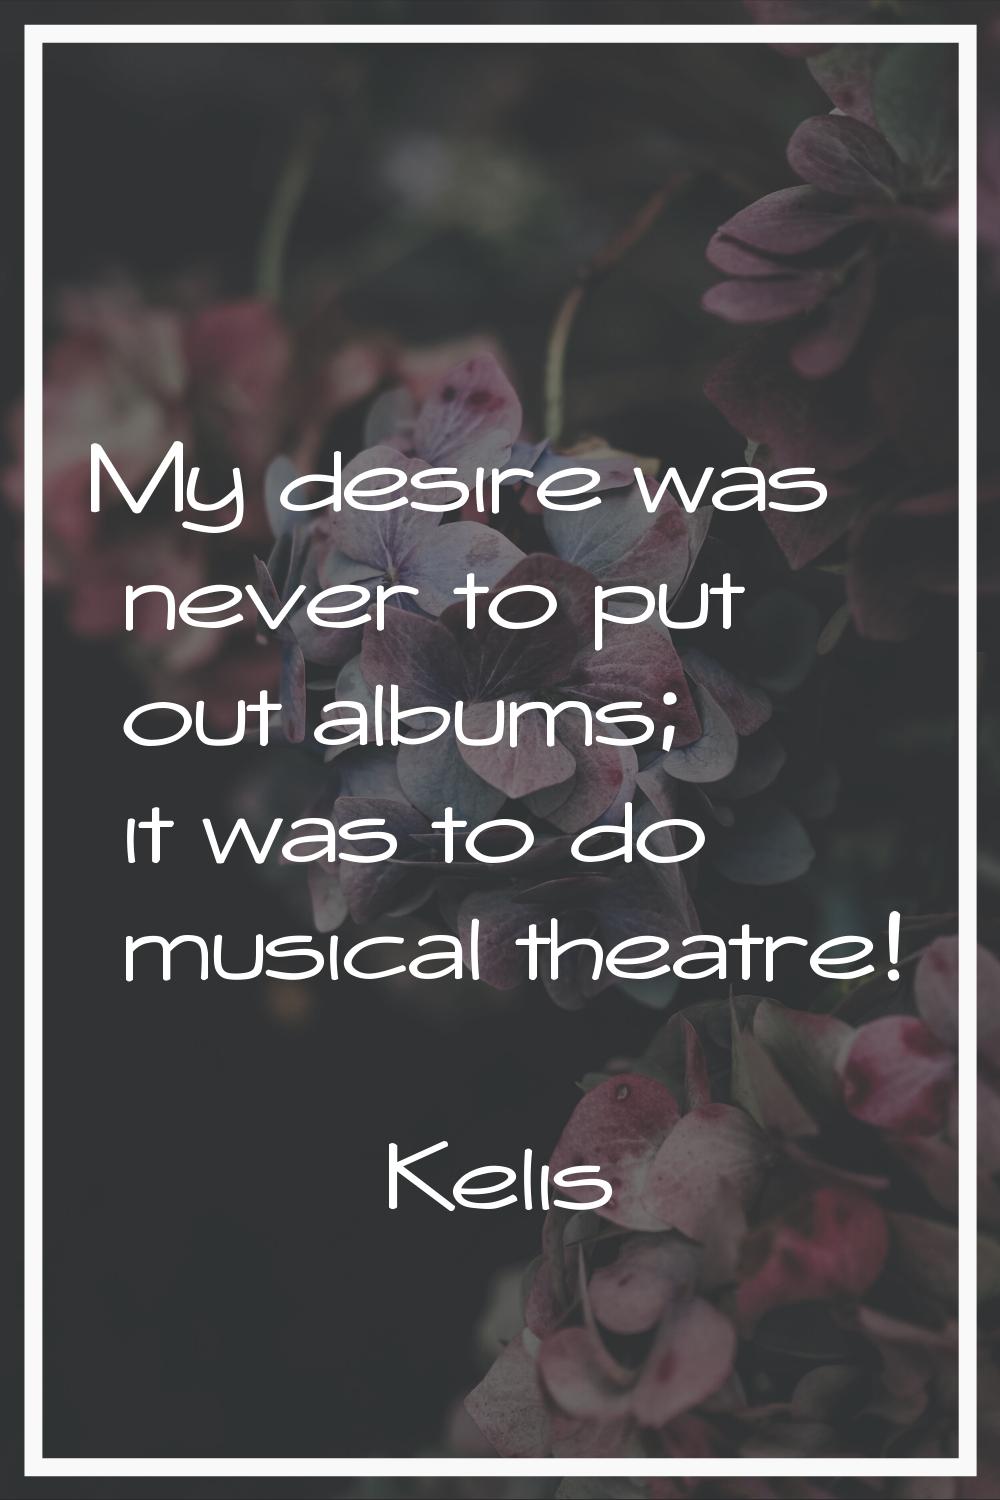 My desire was never to put out albums; it was to do musical theatre!